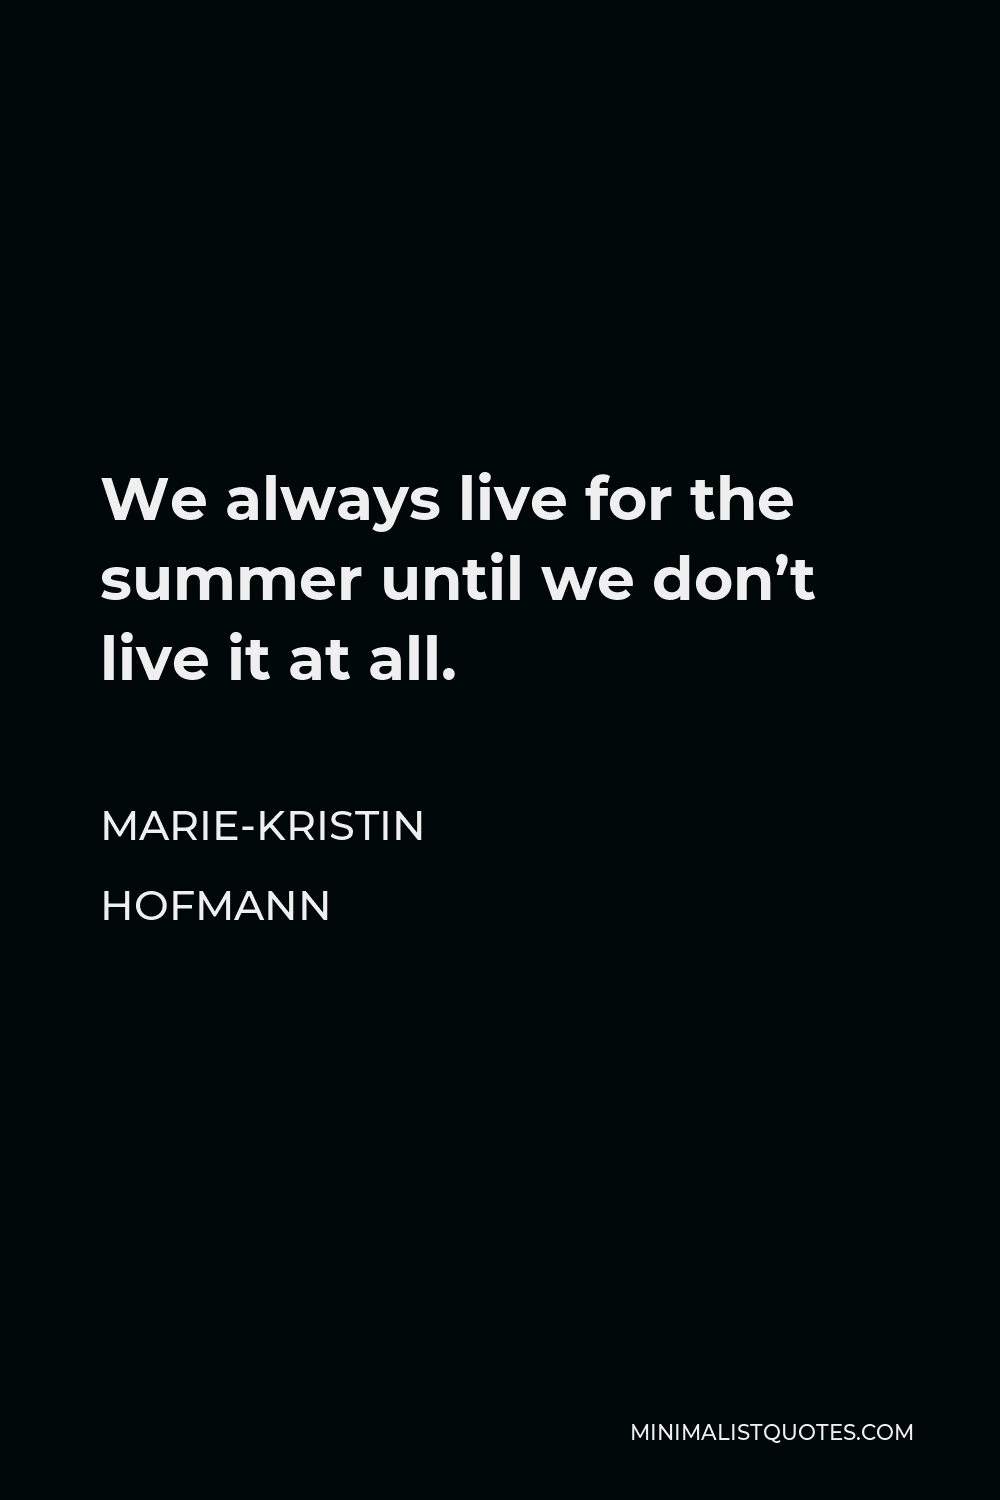 Marie-Kristin Hofmann Quote - We always live for the summer until we don’t live it at all.